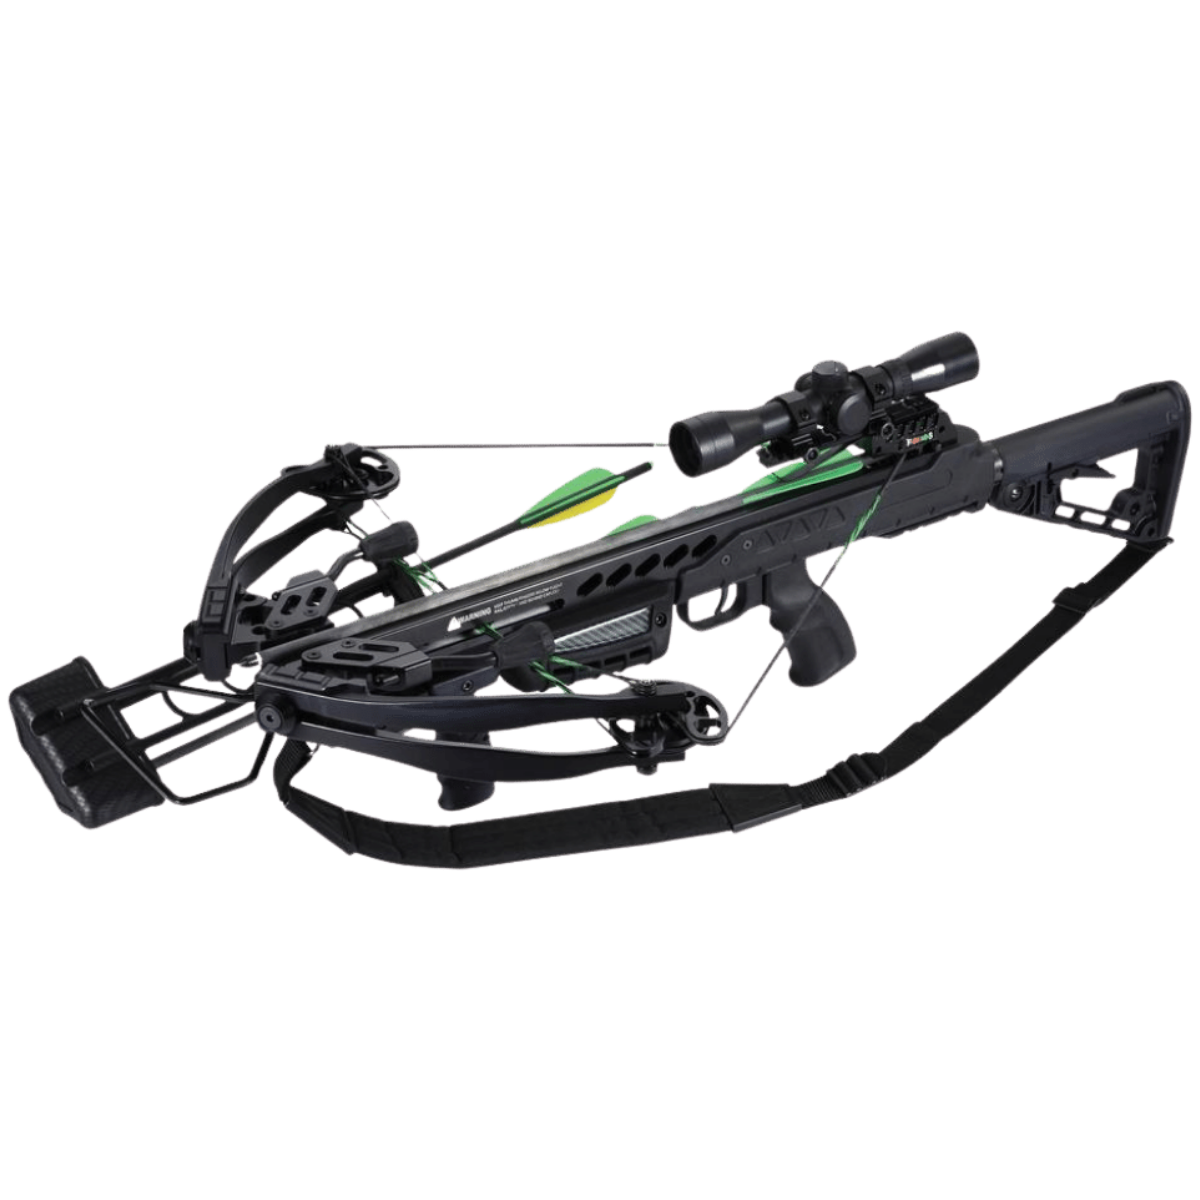 Hori-Zone Kornet 390-XT Crossbow Package 390fps - Fast UK Shipping | Tactical Archery UK